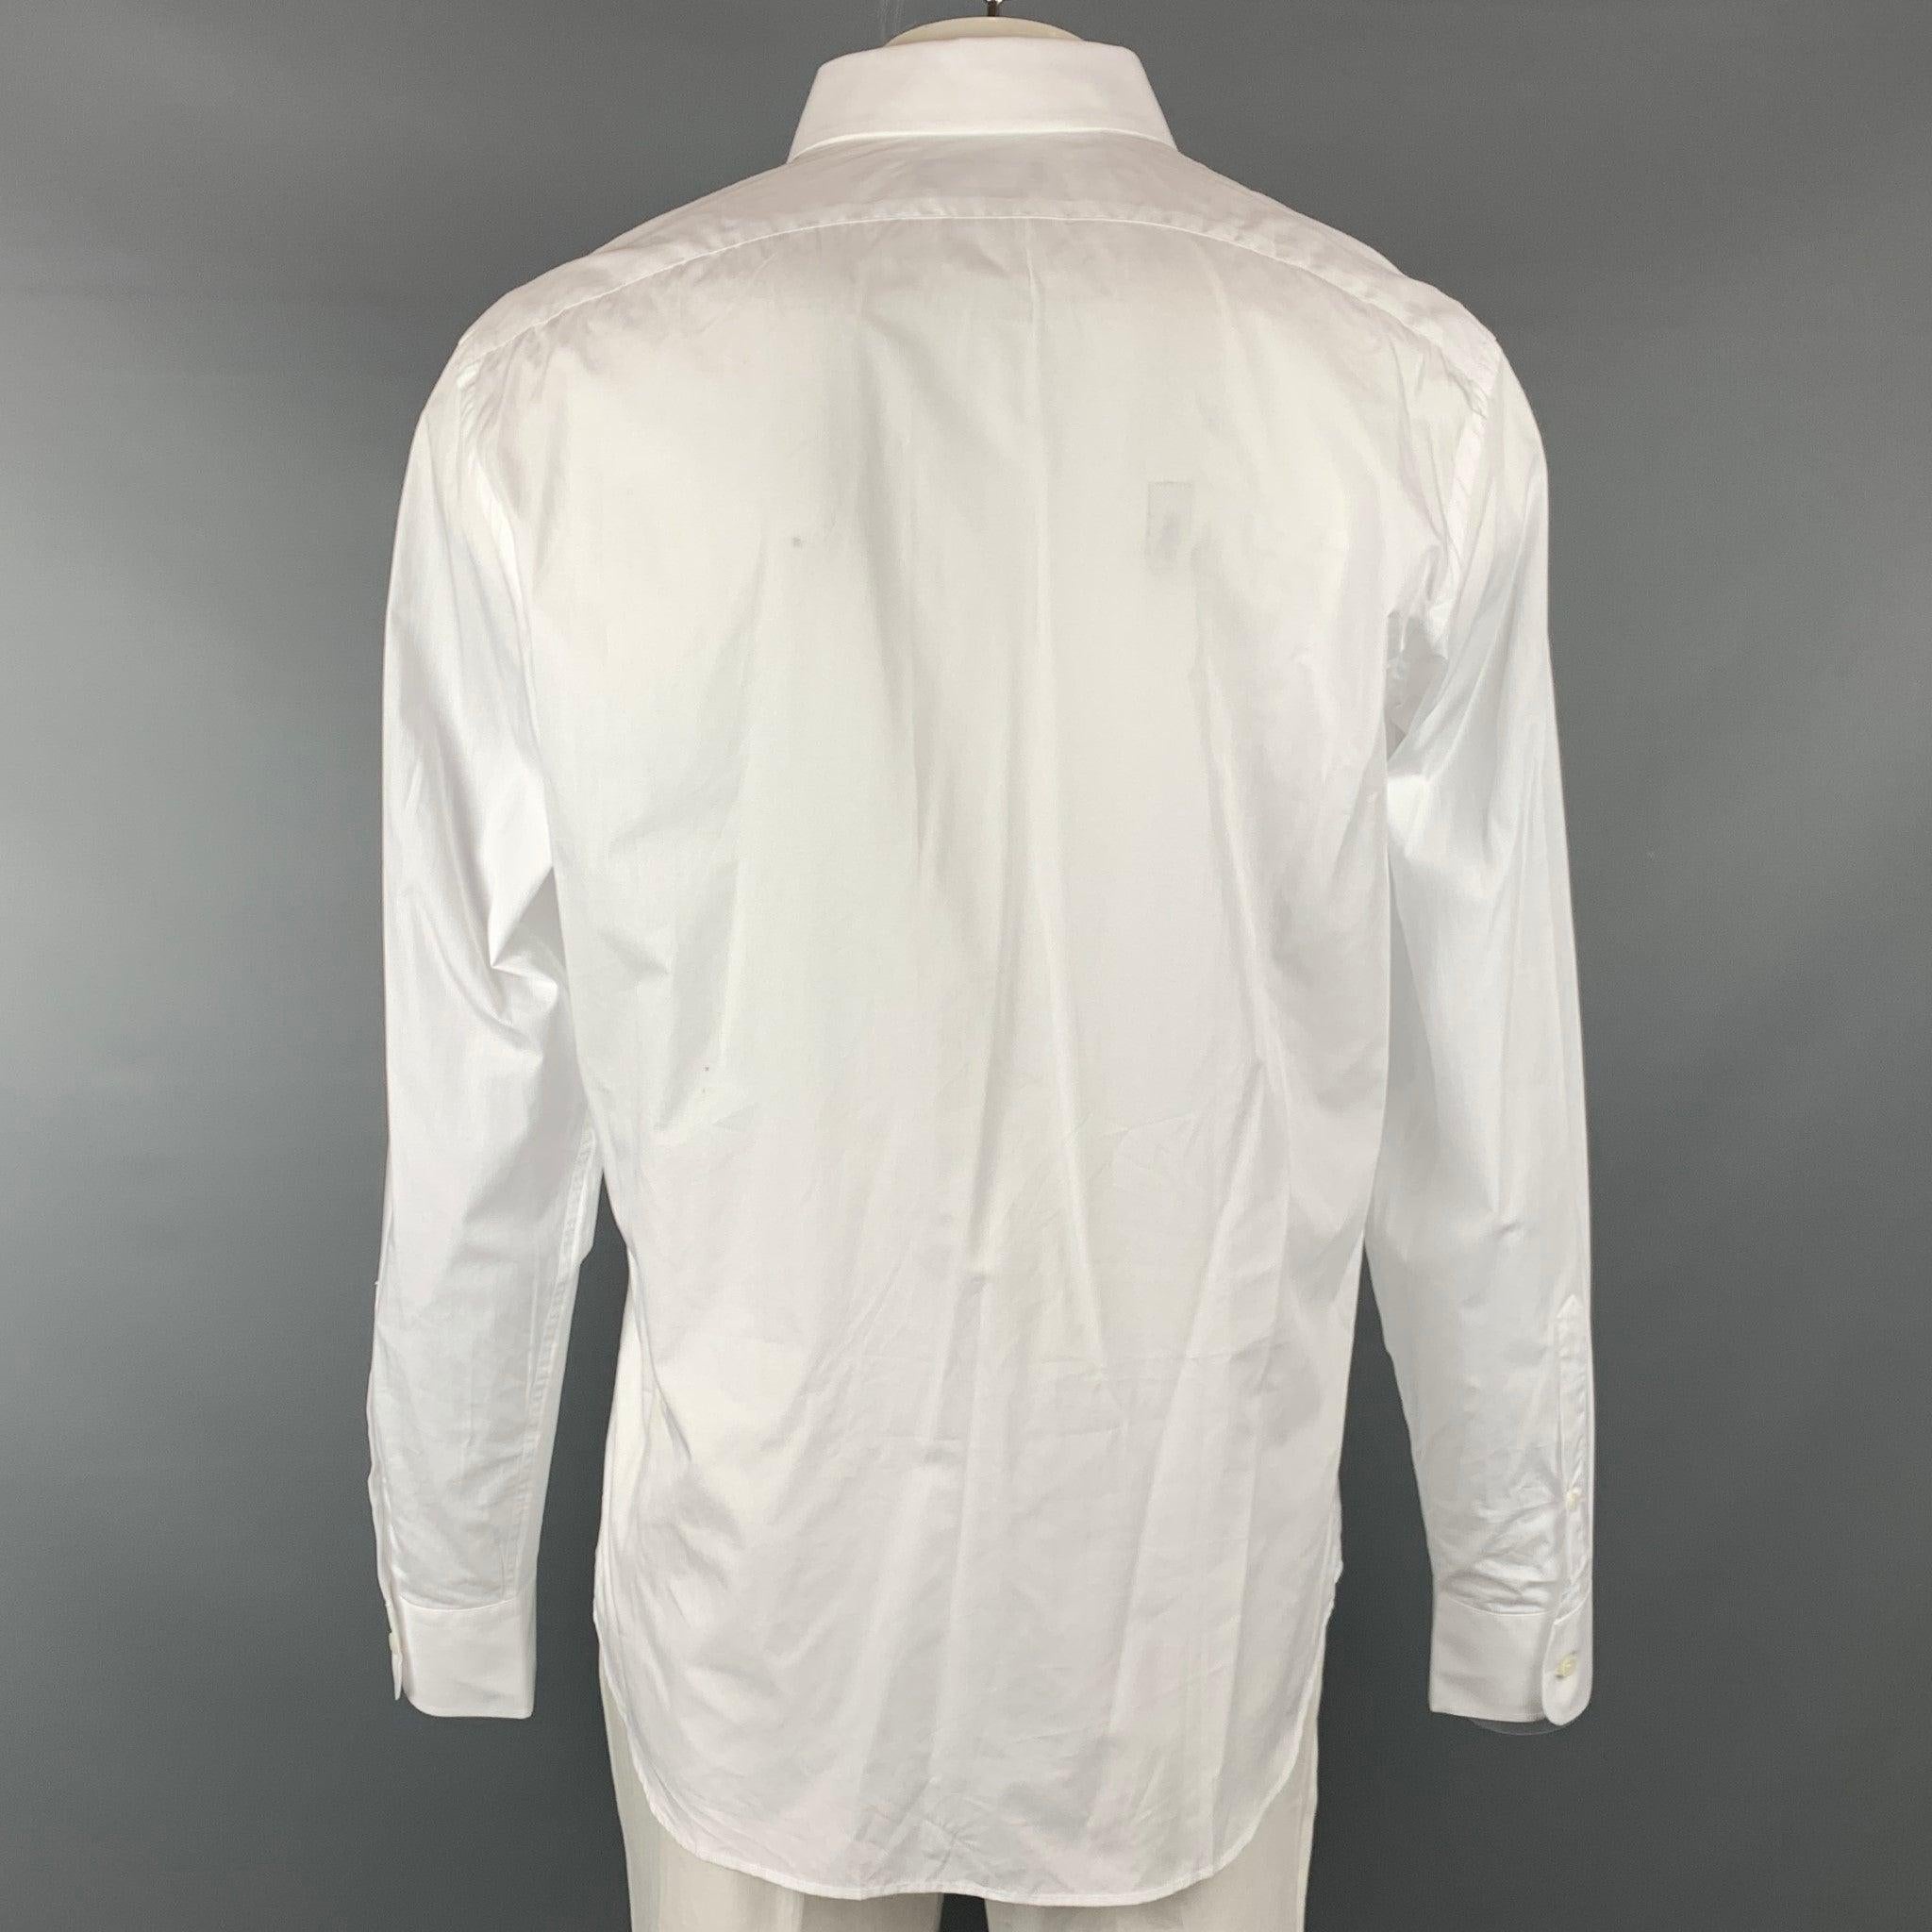 RALPH LAUREN Black Label Size S White Cotton Button Up Long Sleeve Shirt In Excellent Condition For Sale In San Francisco, CA